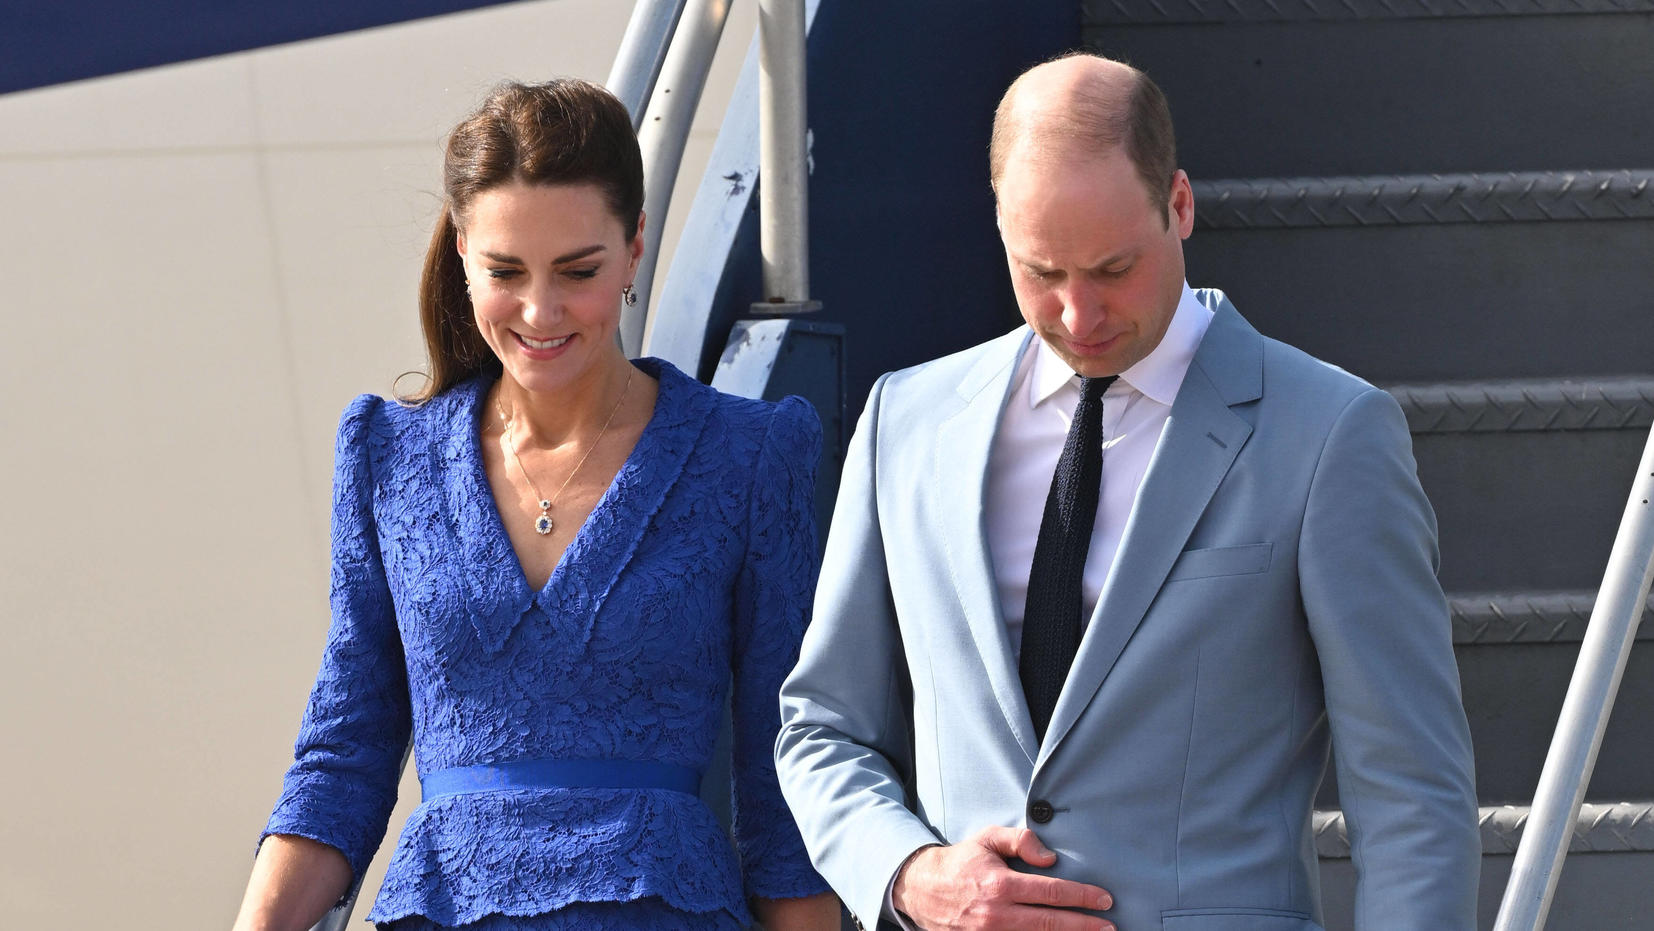  . 19/03/2022. Belize. Prince William and Kate Middleton, the Duke and Duchess of Cambridge arriving at Belize Airport at the start of their Royal Tour of The Caribbean. PUBLICATIONxINxGERxSUIxAUTxHUNxONLY xStephenxLockx/xi-Imagesx IIM-23218-0014